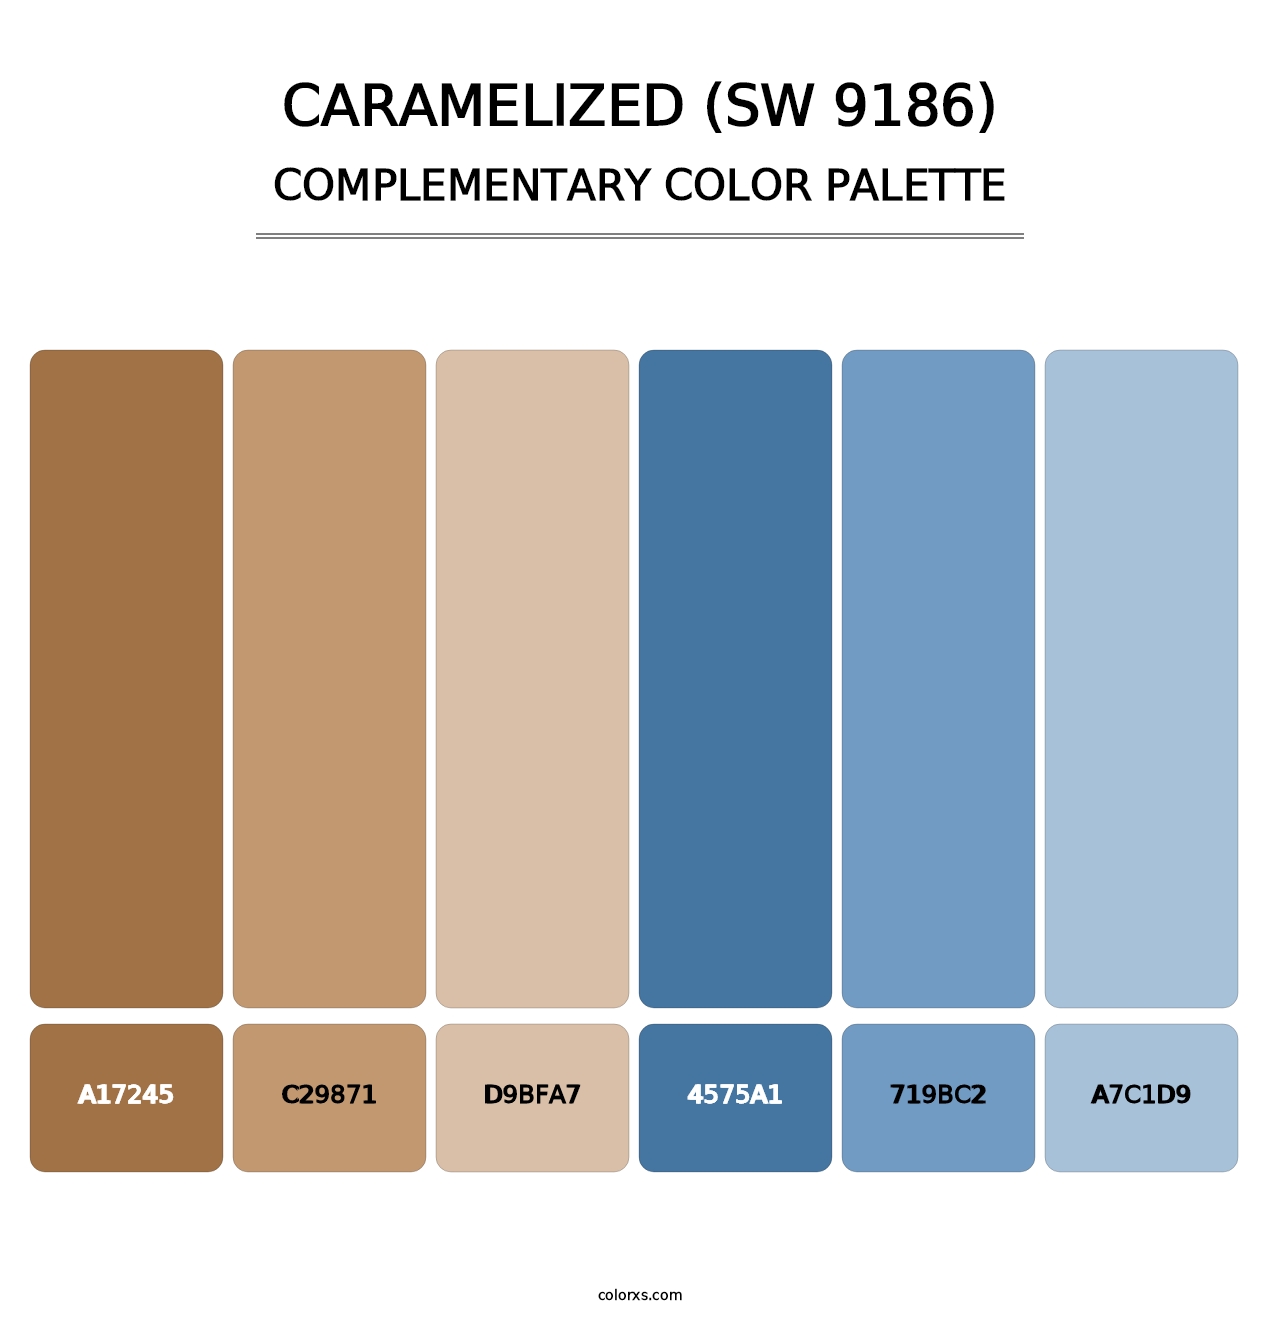 Caramelized (SW 9186) - Complementary Color Palette